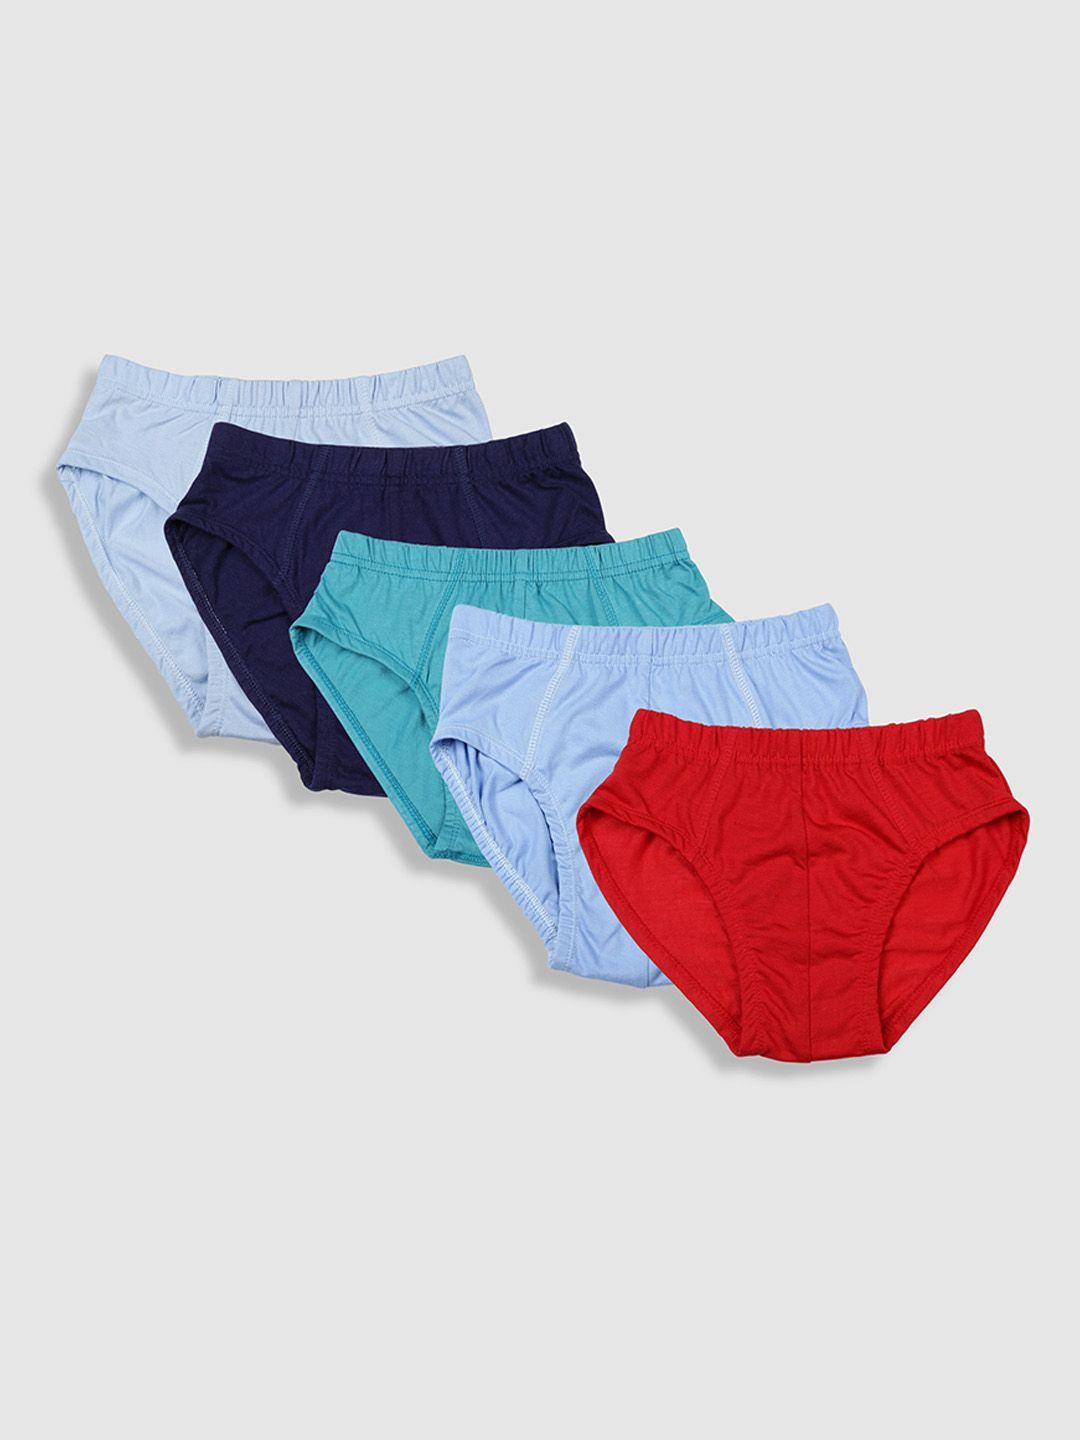 yk boys pack of 5 assorted cotton briefs